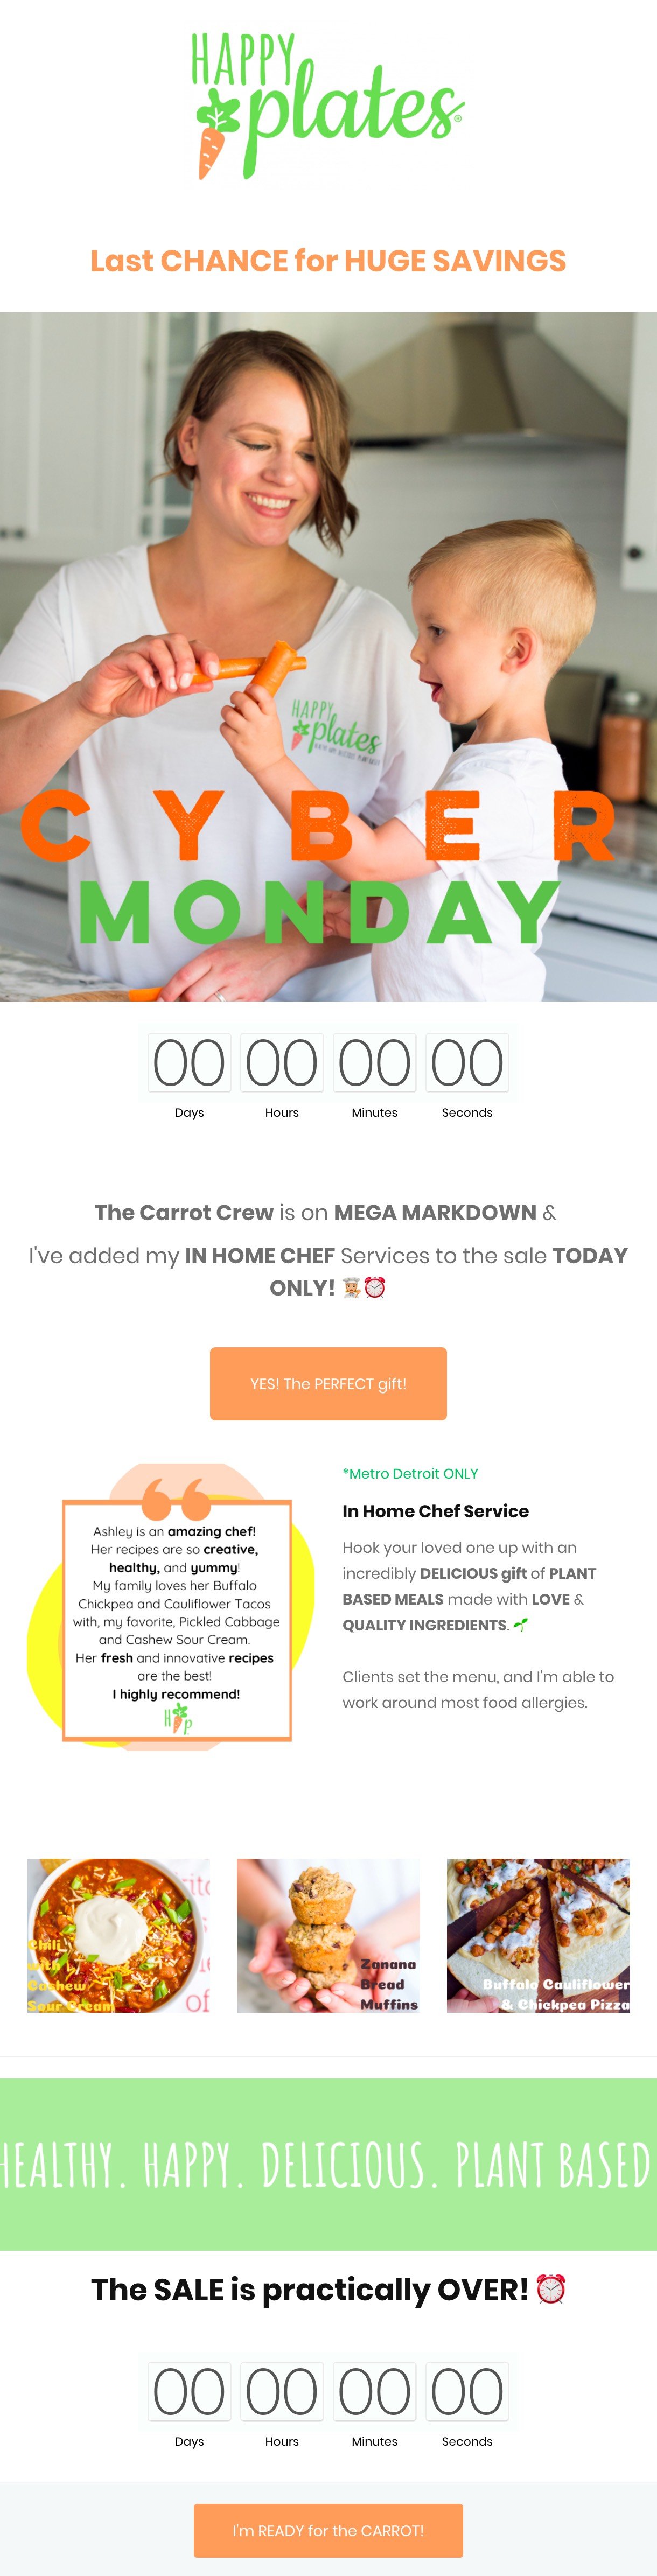 Happy Plates Cyber Monday email example countdown timer